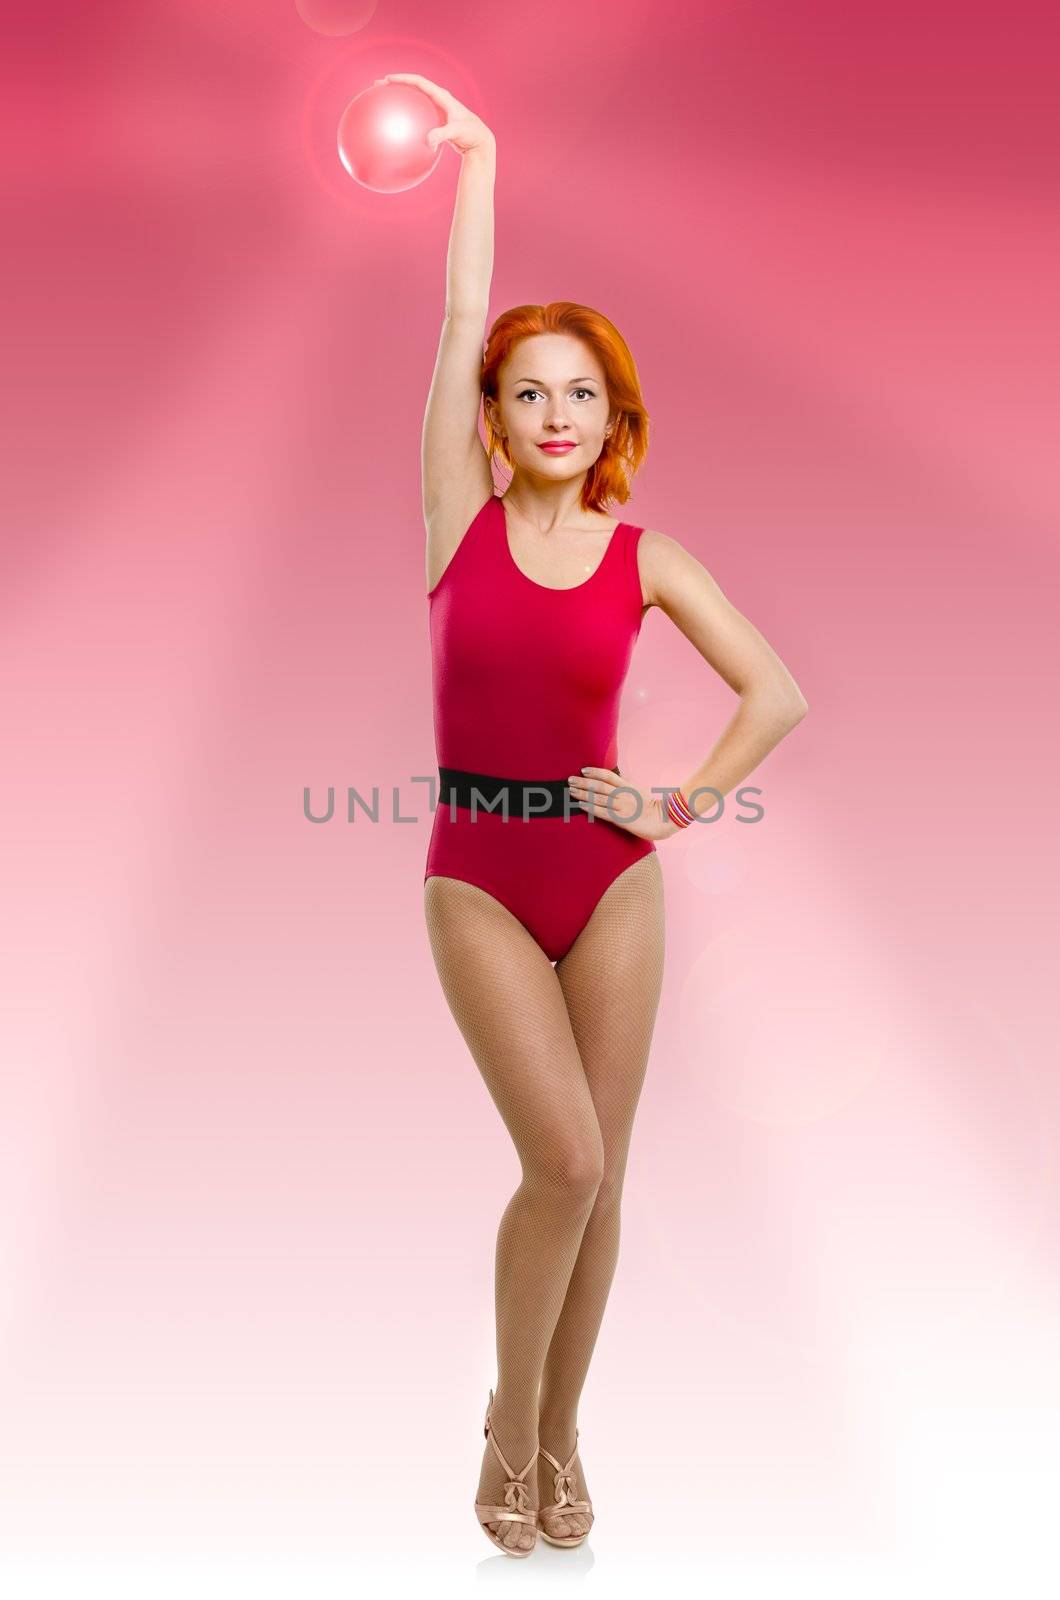 Slim fitness model standing with radiant fitball on pink background